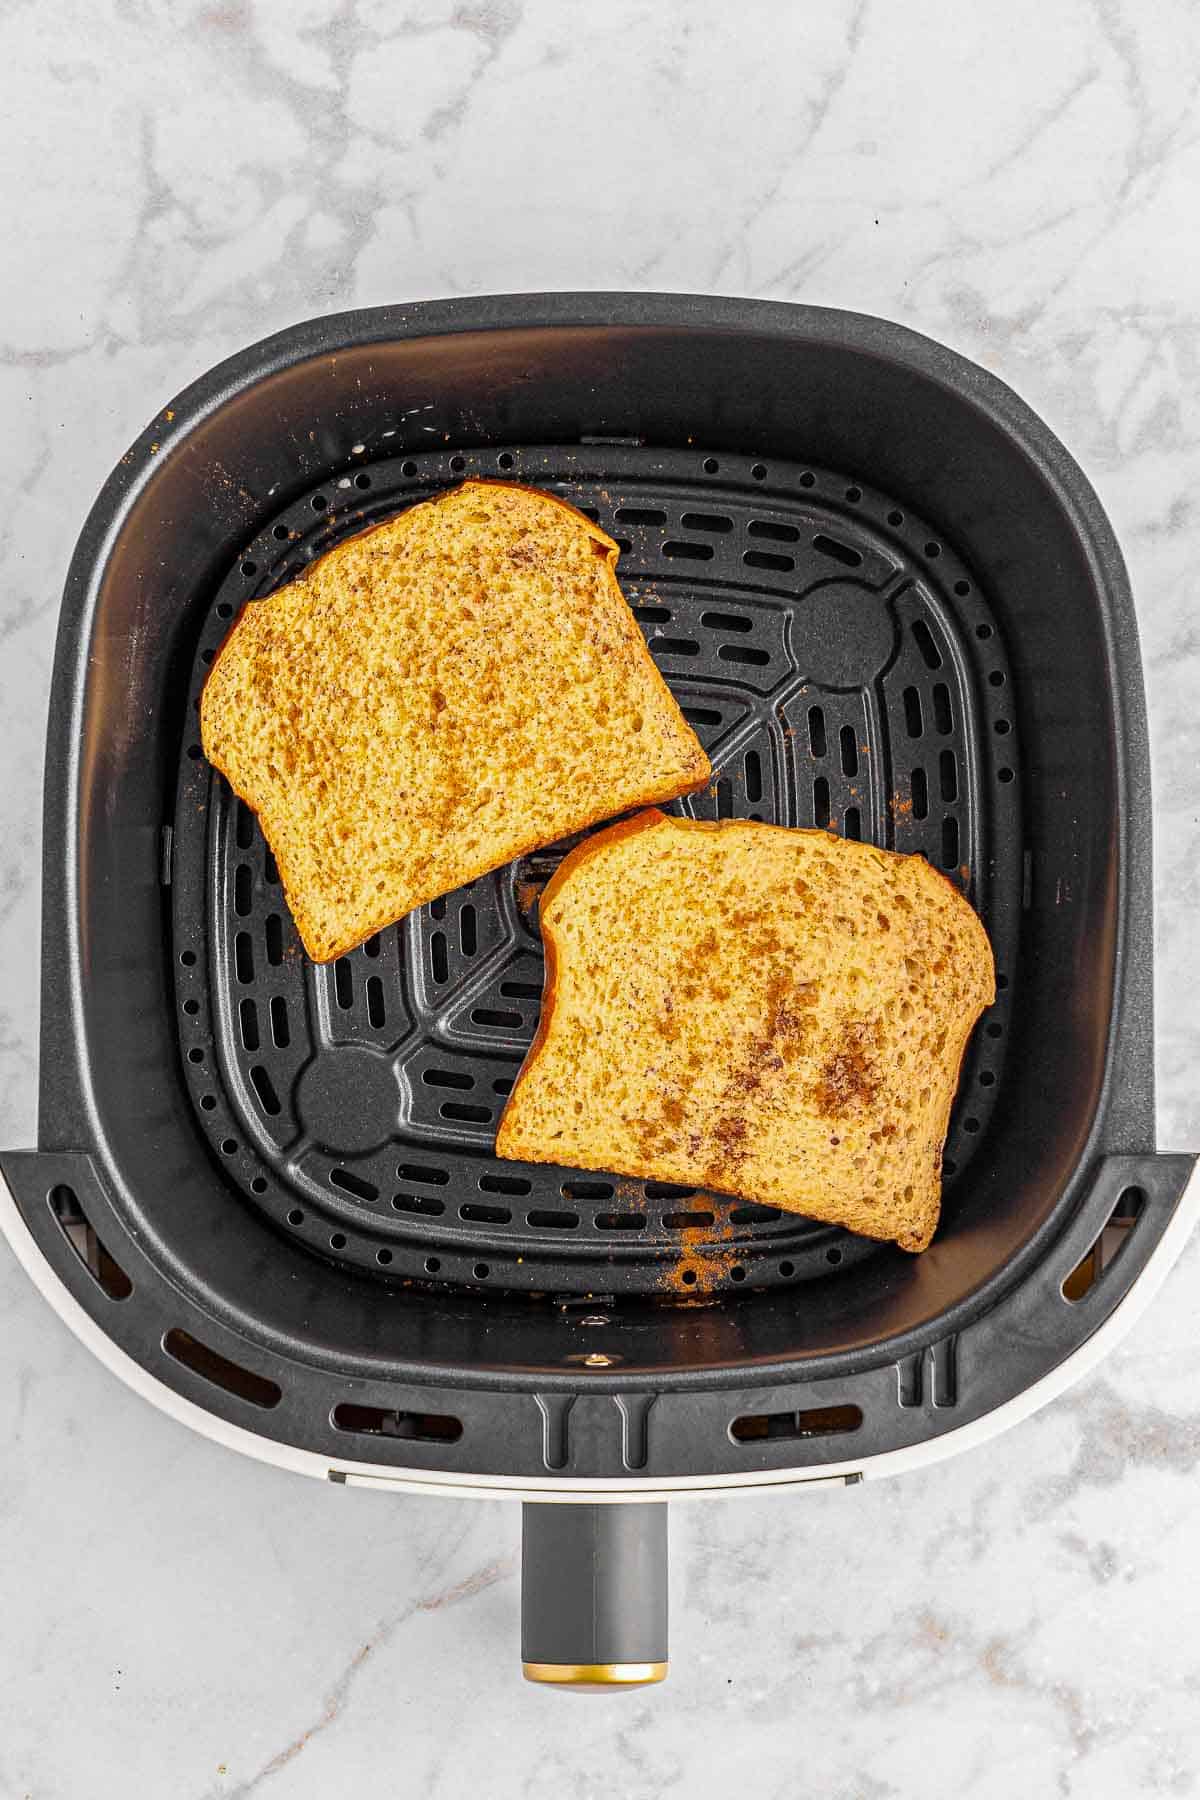 Two slices of egg coated bread in an air fryer.